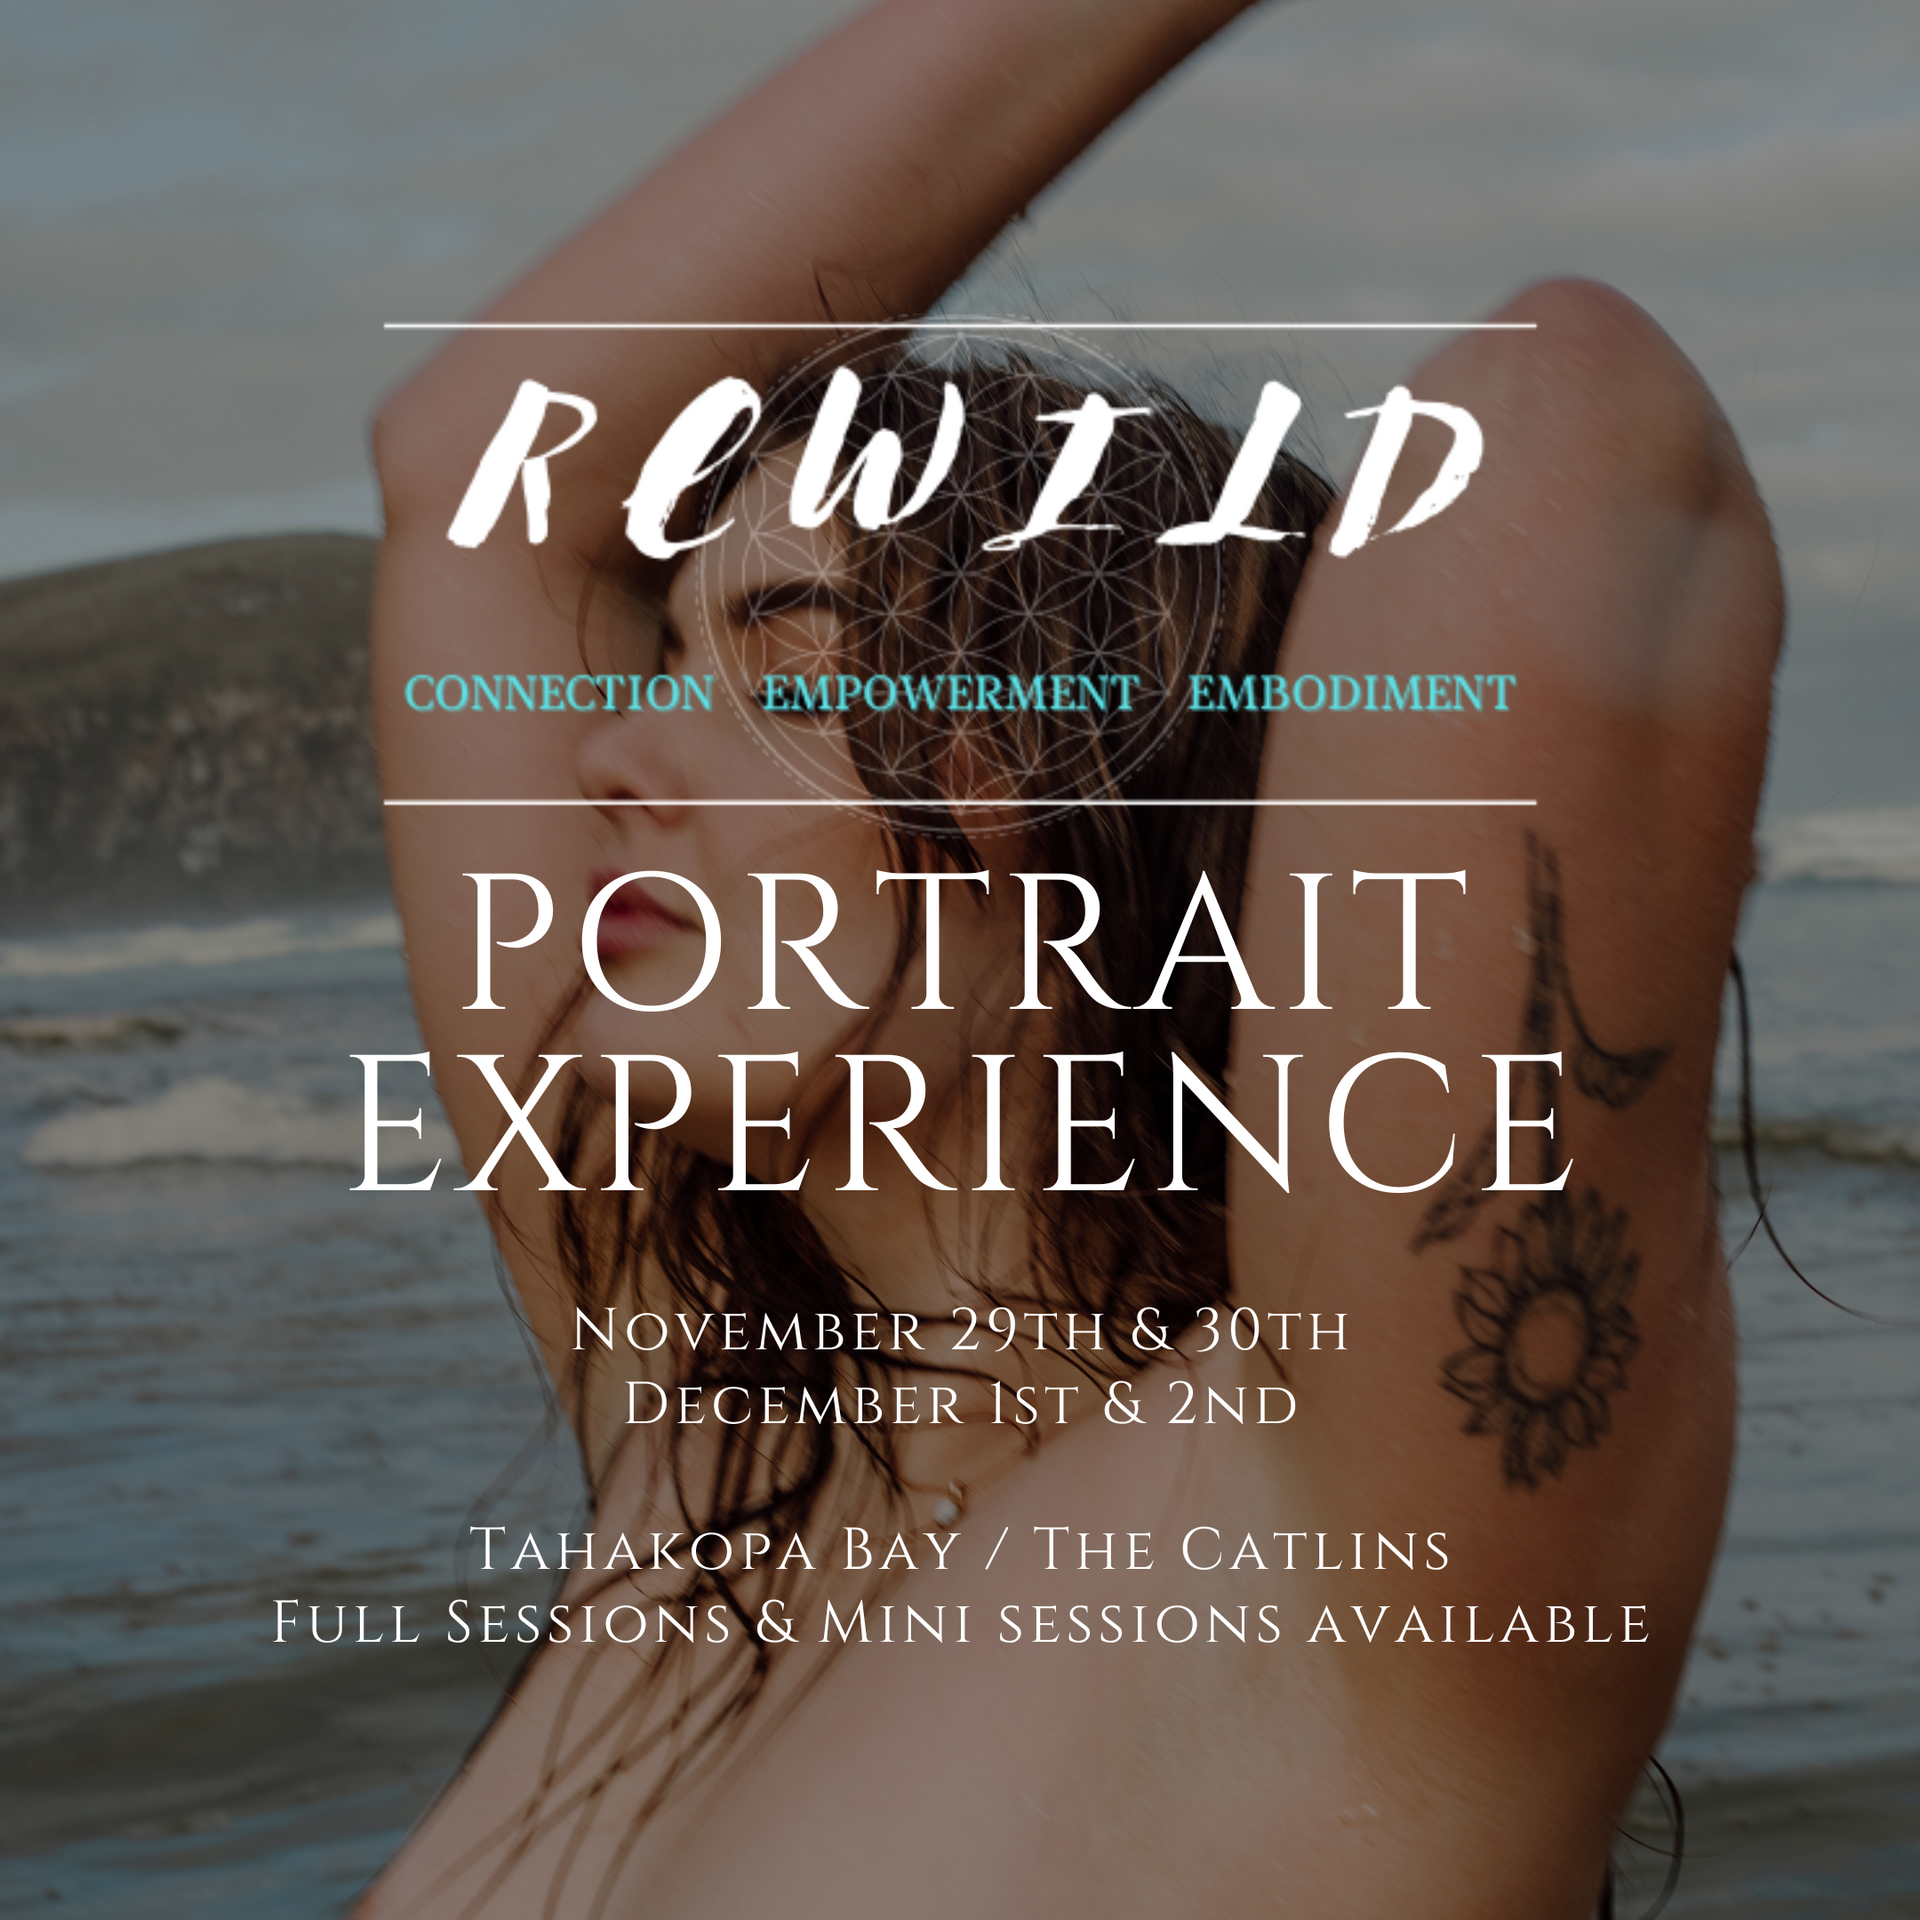 Rewild Portrait Experience: Finding Your Wild (The Catlins) - November / December